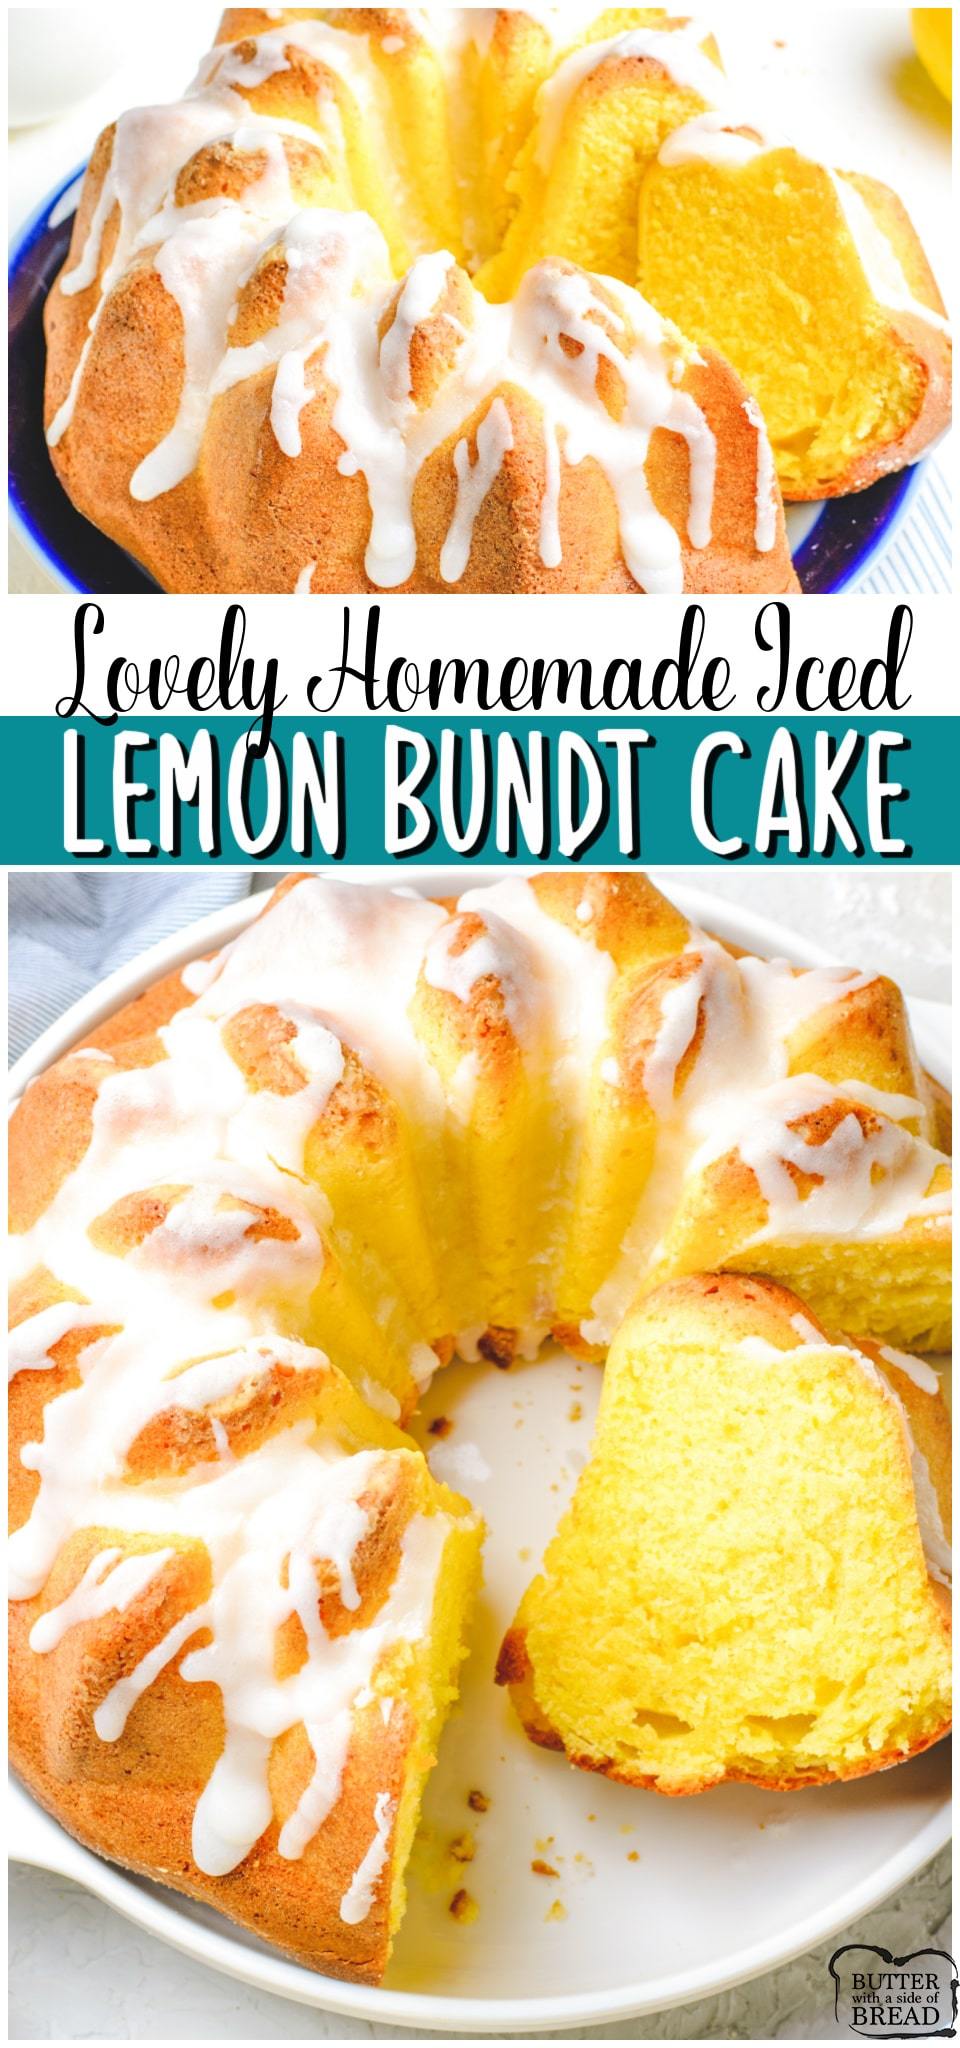 Iced lemon bundt cake made with classic ingredients with bright, fresh lemon flavor! Vanilla cake recipe with lemon juice and lemon zest for a delicious Springtime dessert. #cake #lemon #bundt #homemade #cakerecipe #baking #easyrecipe from BUTTER WITH A SIDE OF BREAD